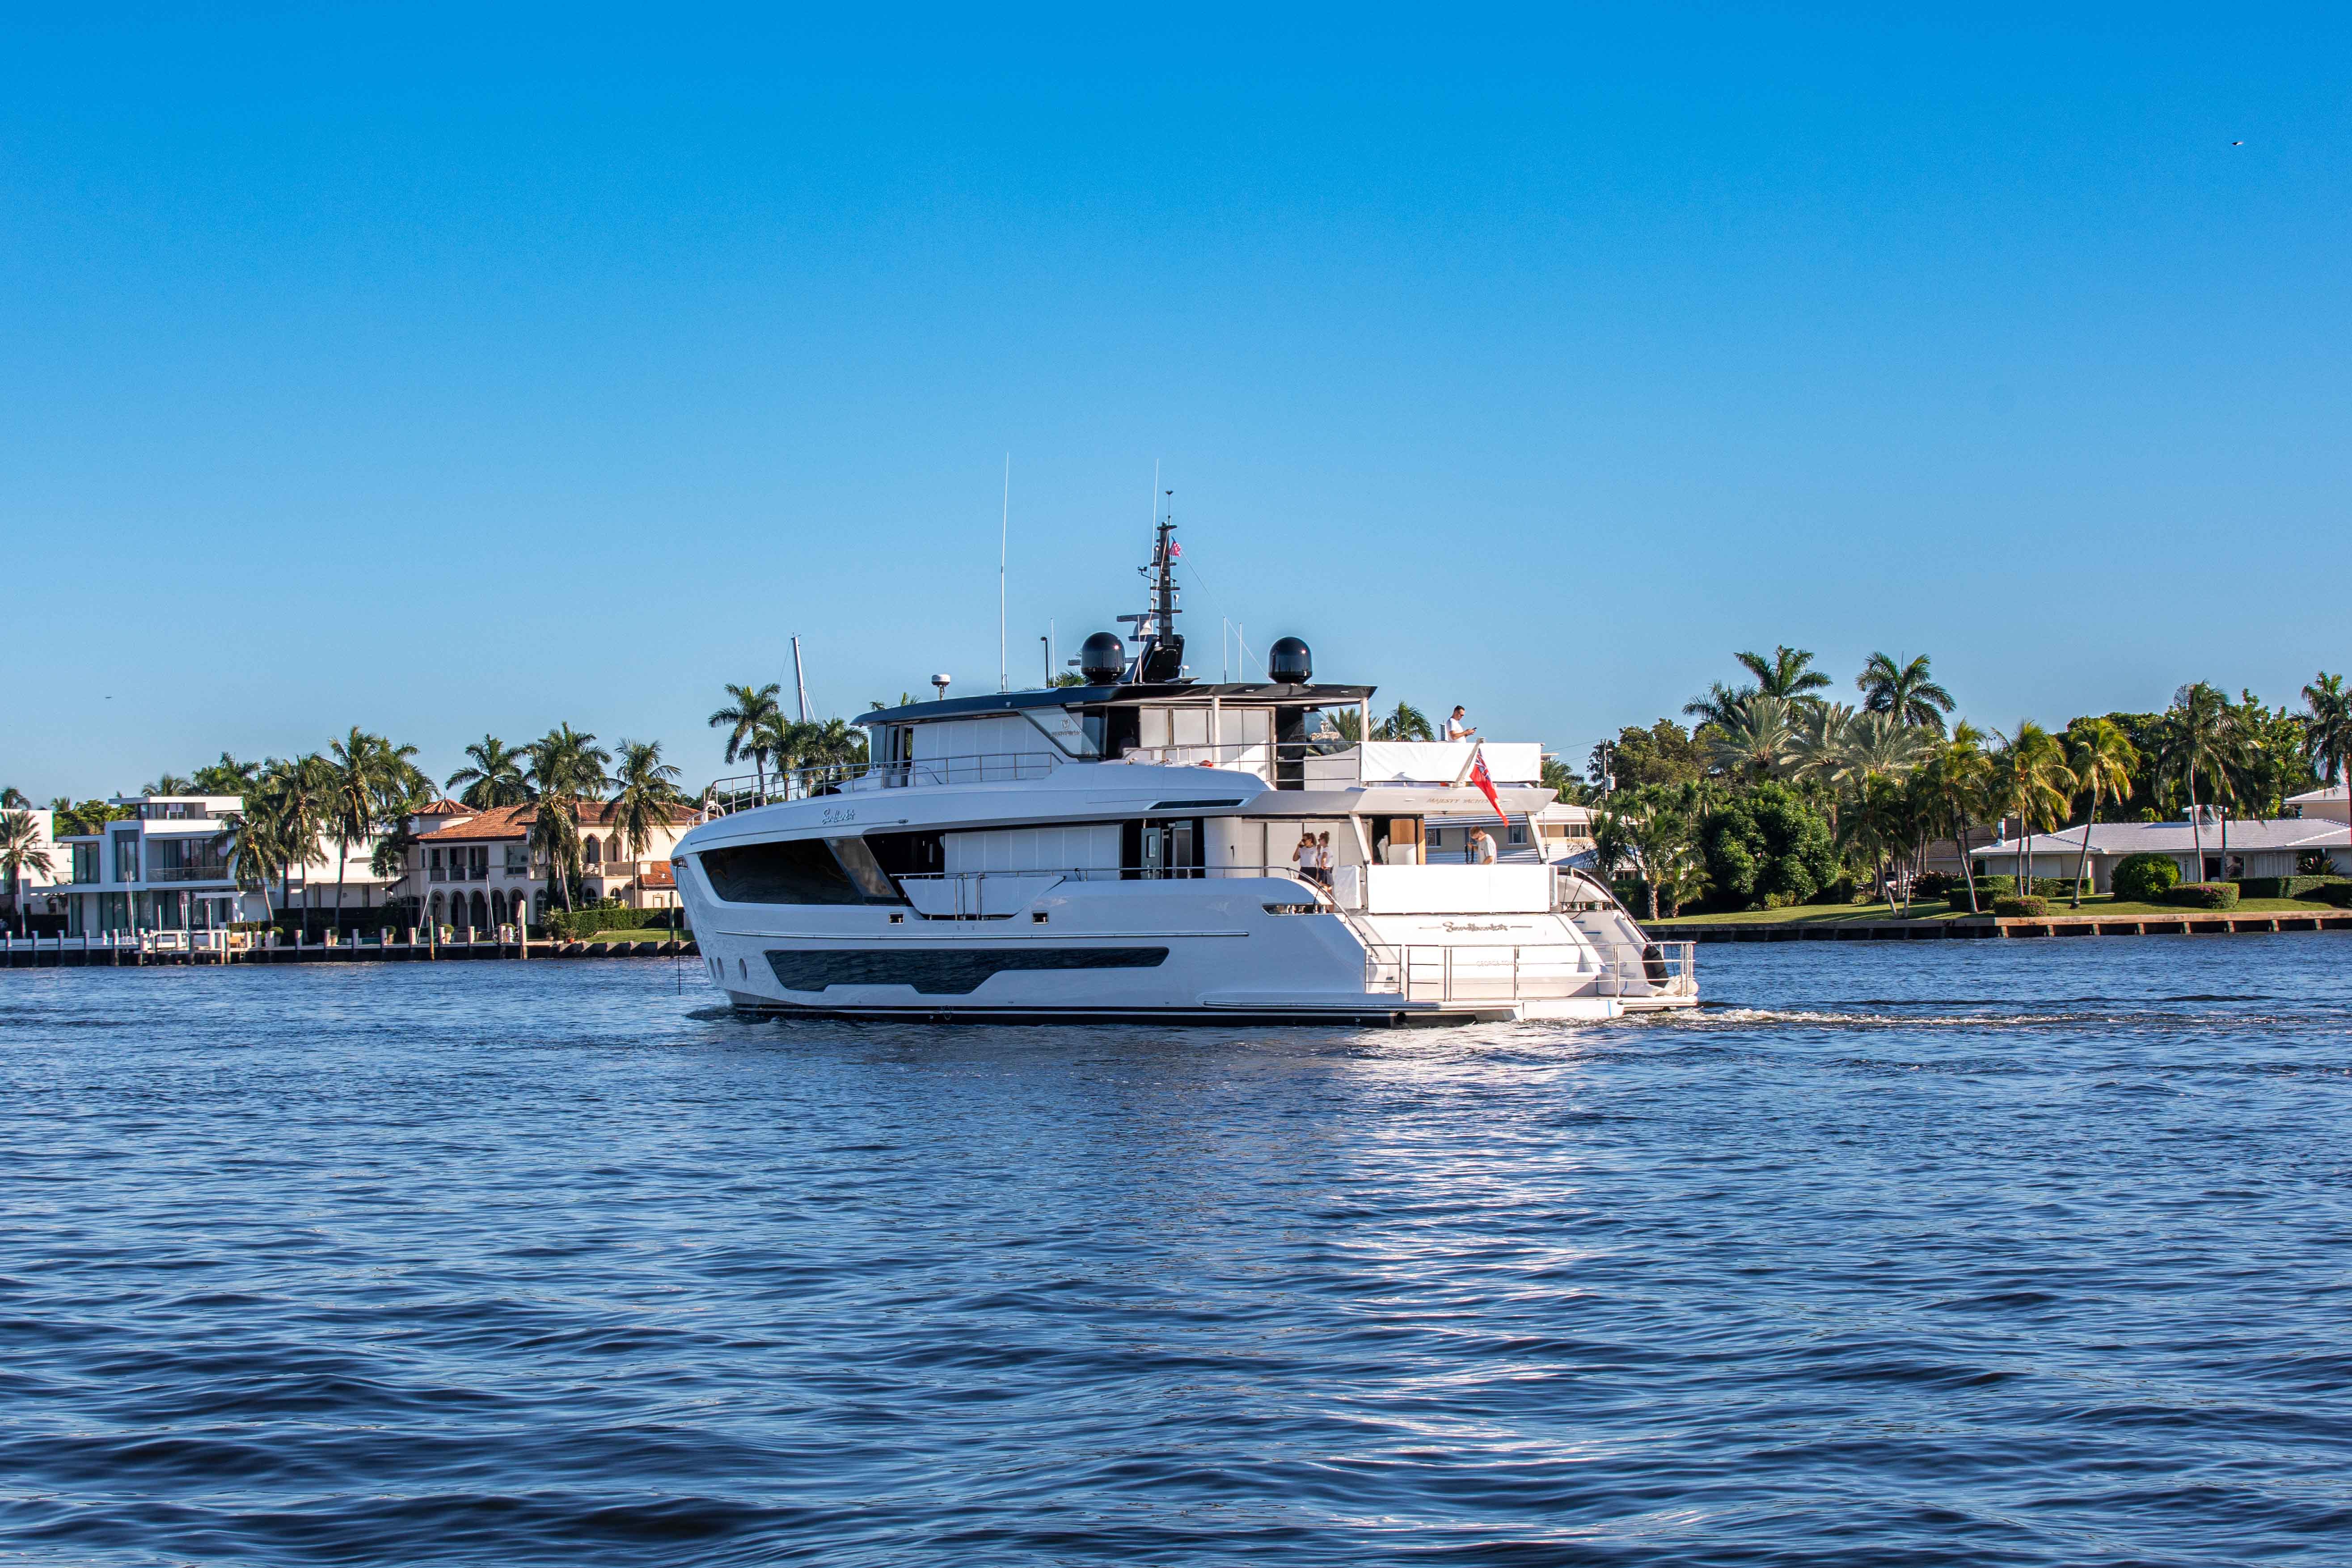 Majesty 111 - Arrival at FLIBS 5